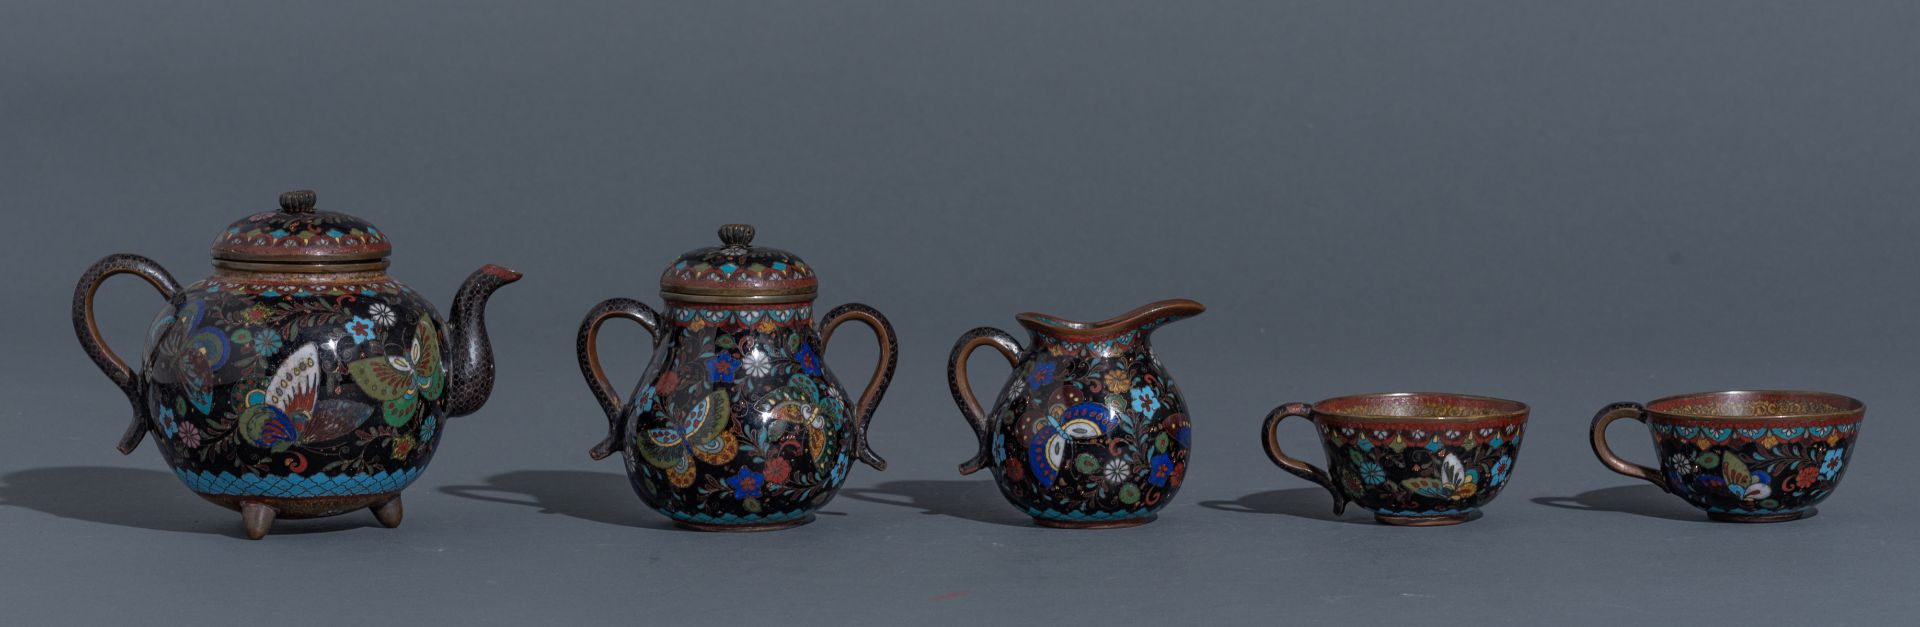 A Japanese cloisonné enamel tea set, i.e. a tray, two cups and saucers, a teapot and cover, a milk j - Image 6 of 9